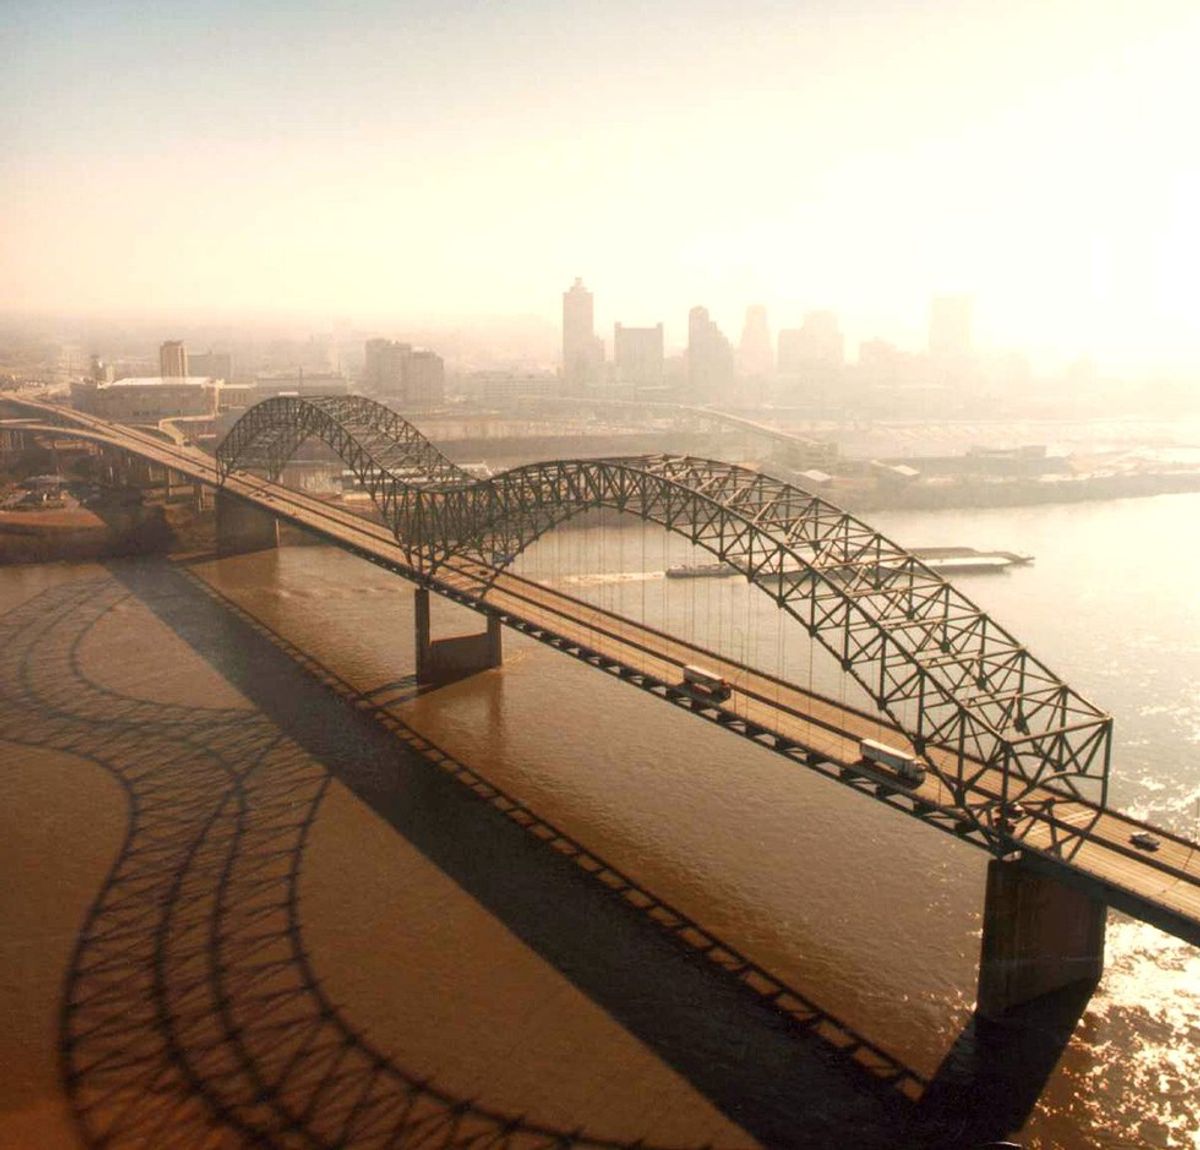 How Much Do You Know About Memphis, Tennessee?